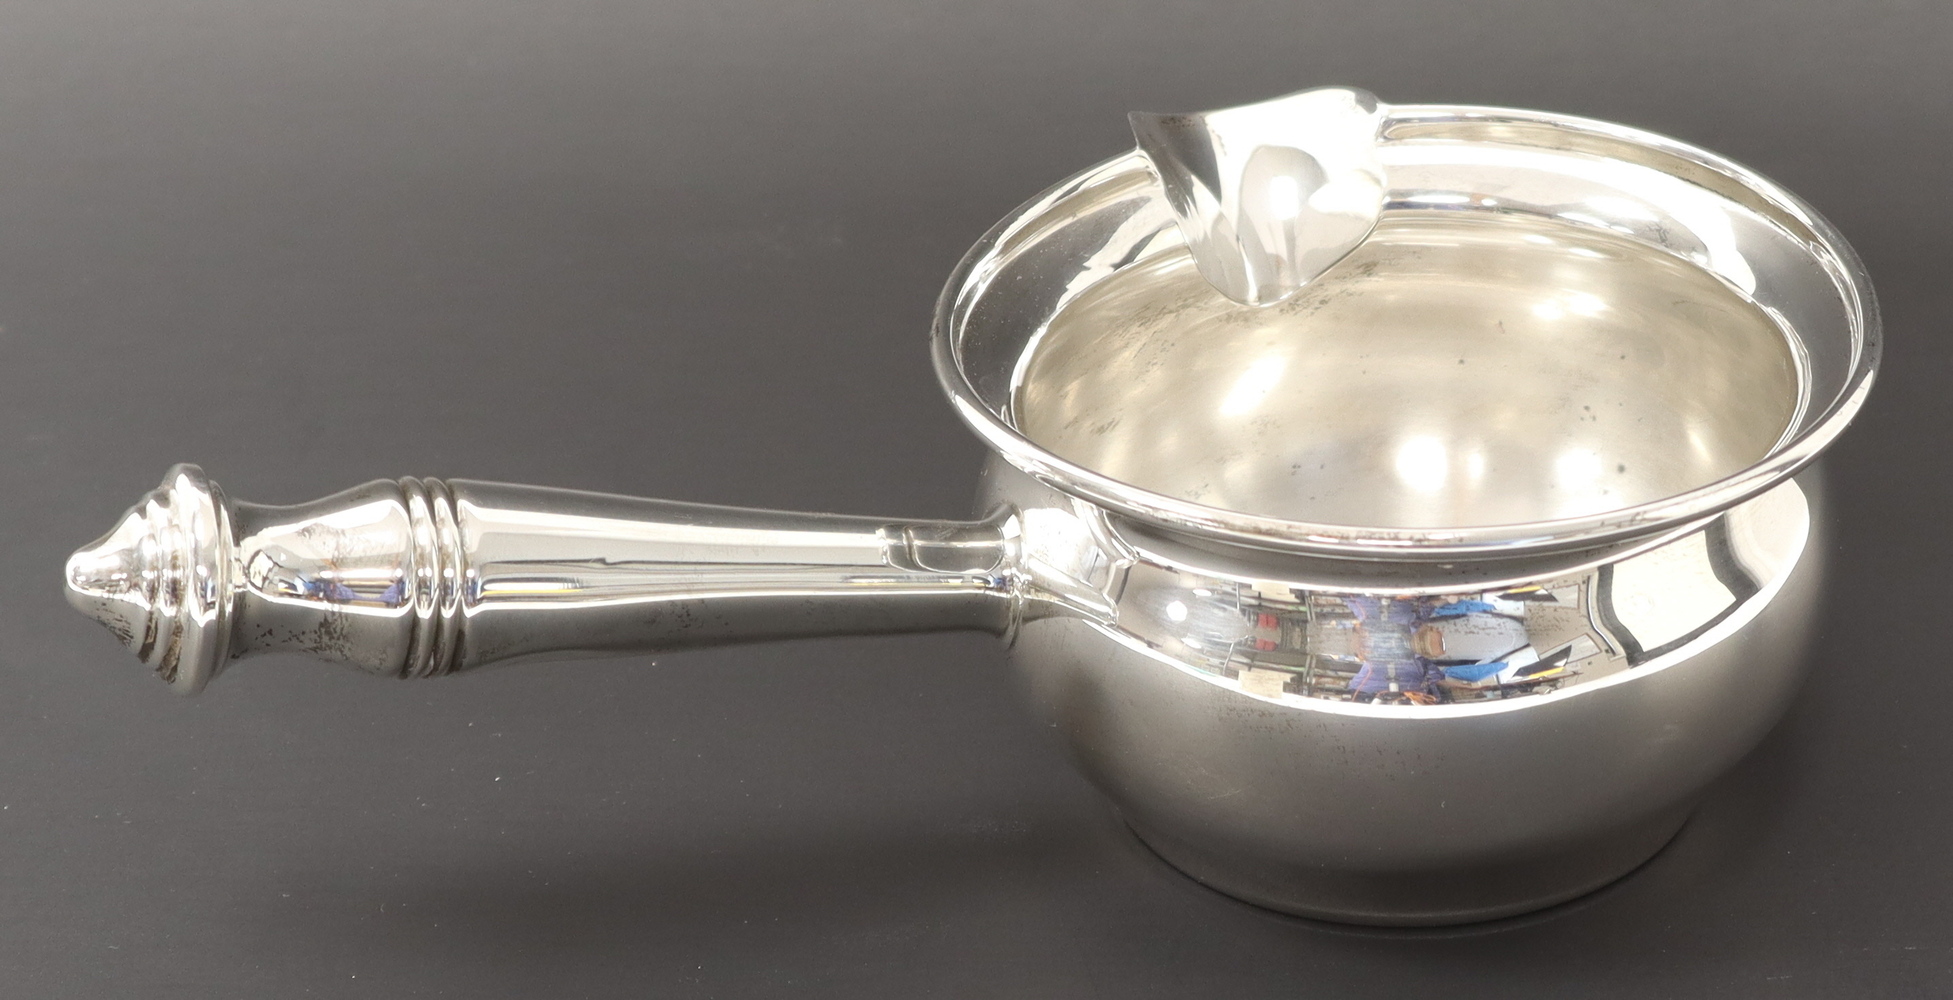  antique revere silver brandy warmer/sauceboat with silver handle 542 sterling